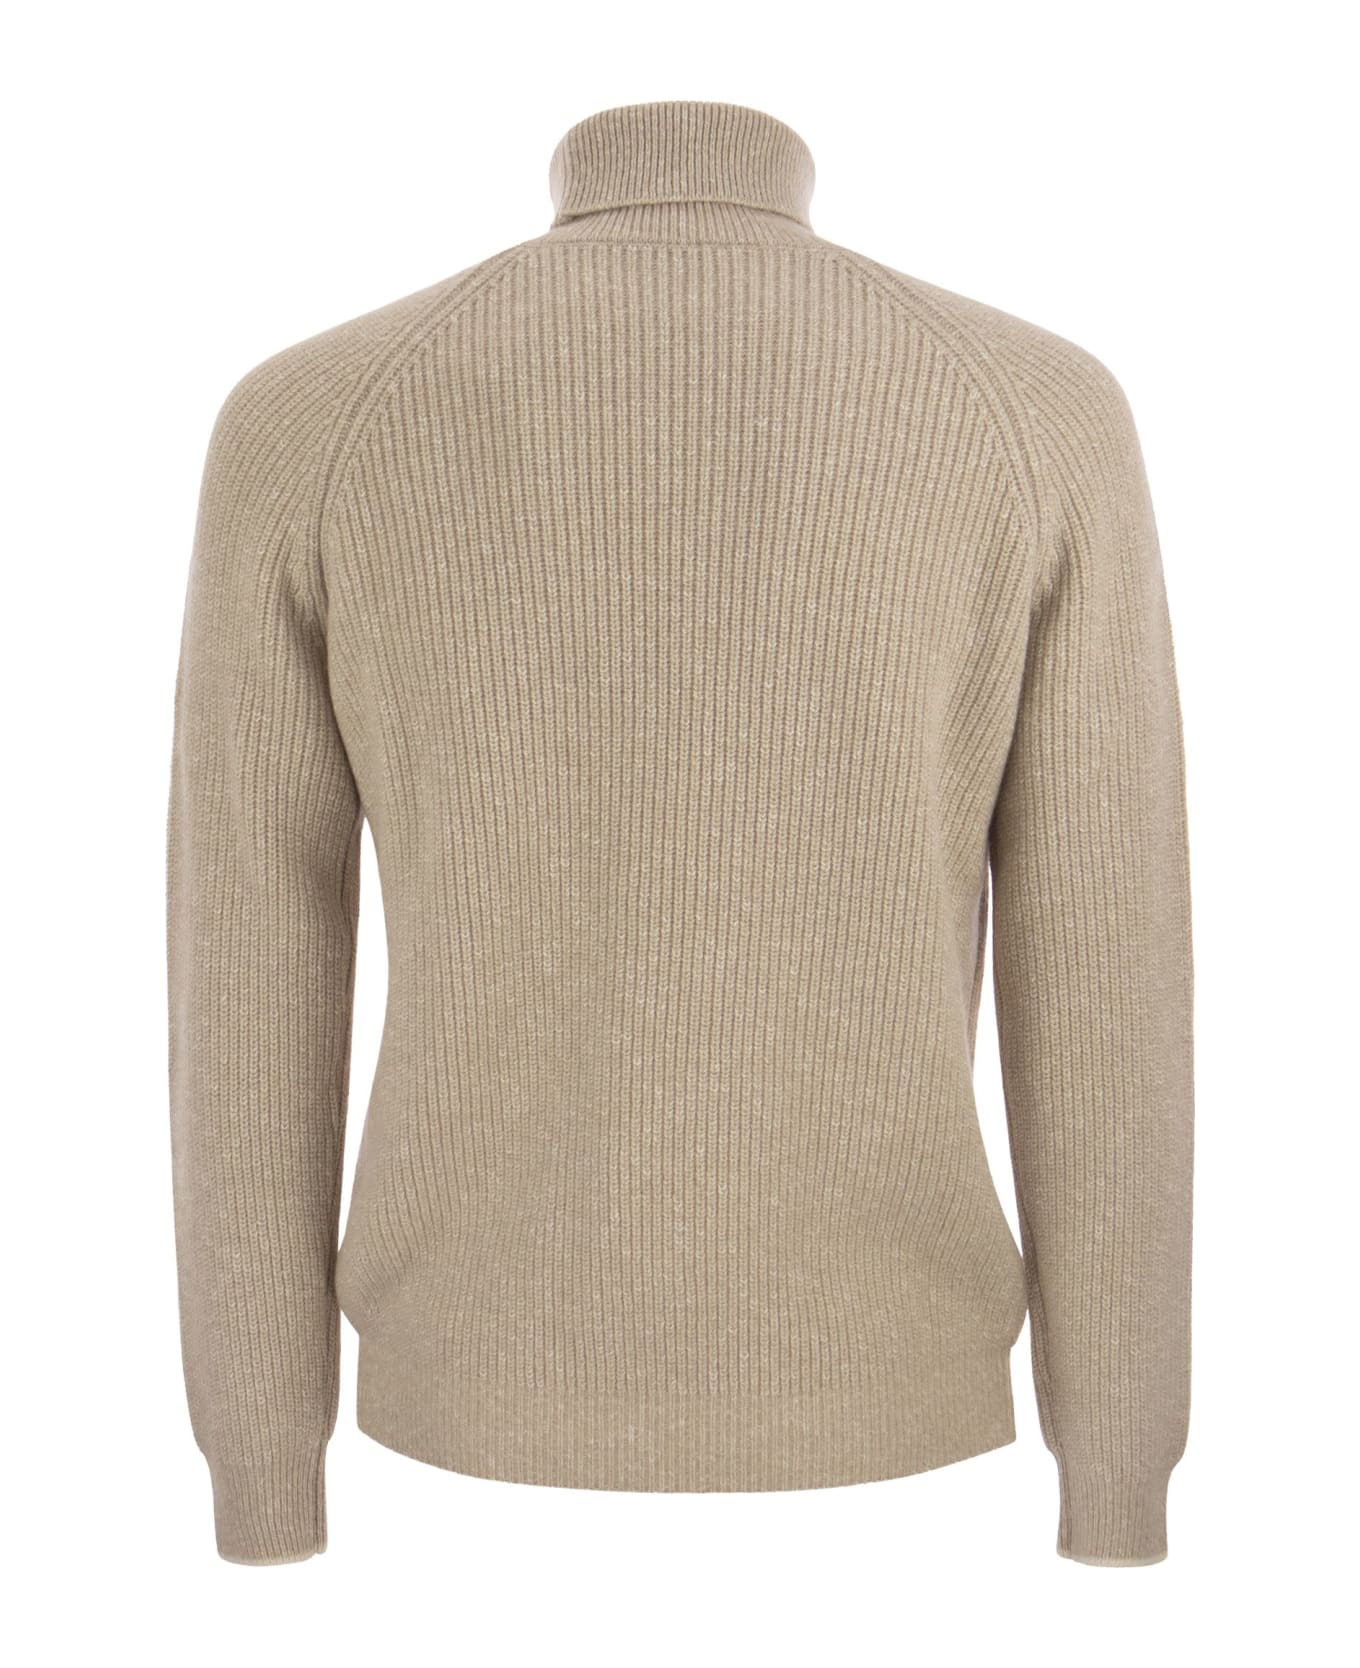 Peserico Wool And Cashmere Turtleneck Sweater - Beige